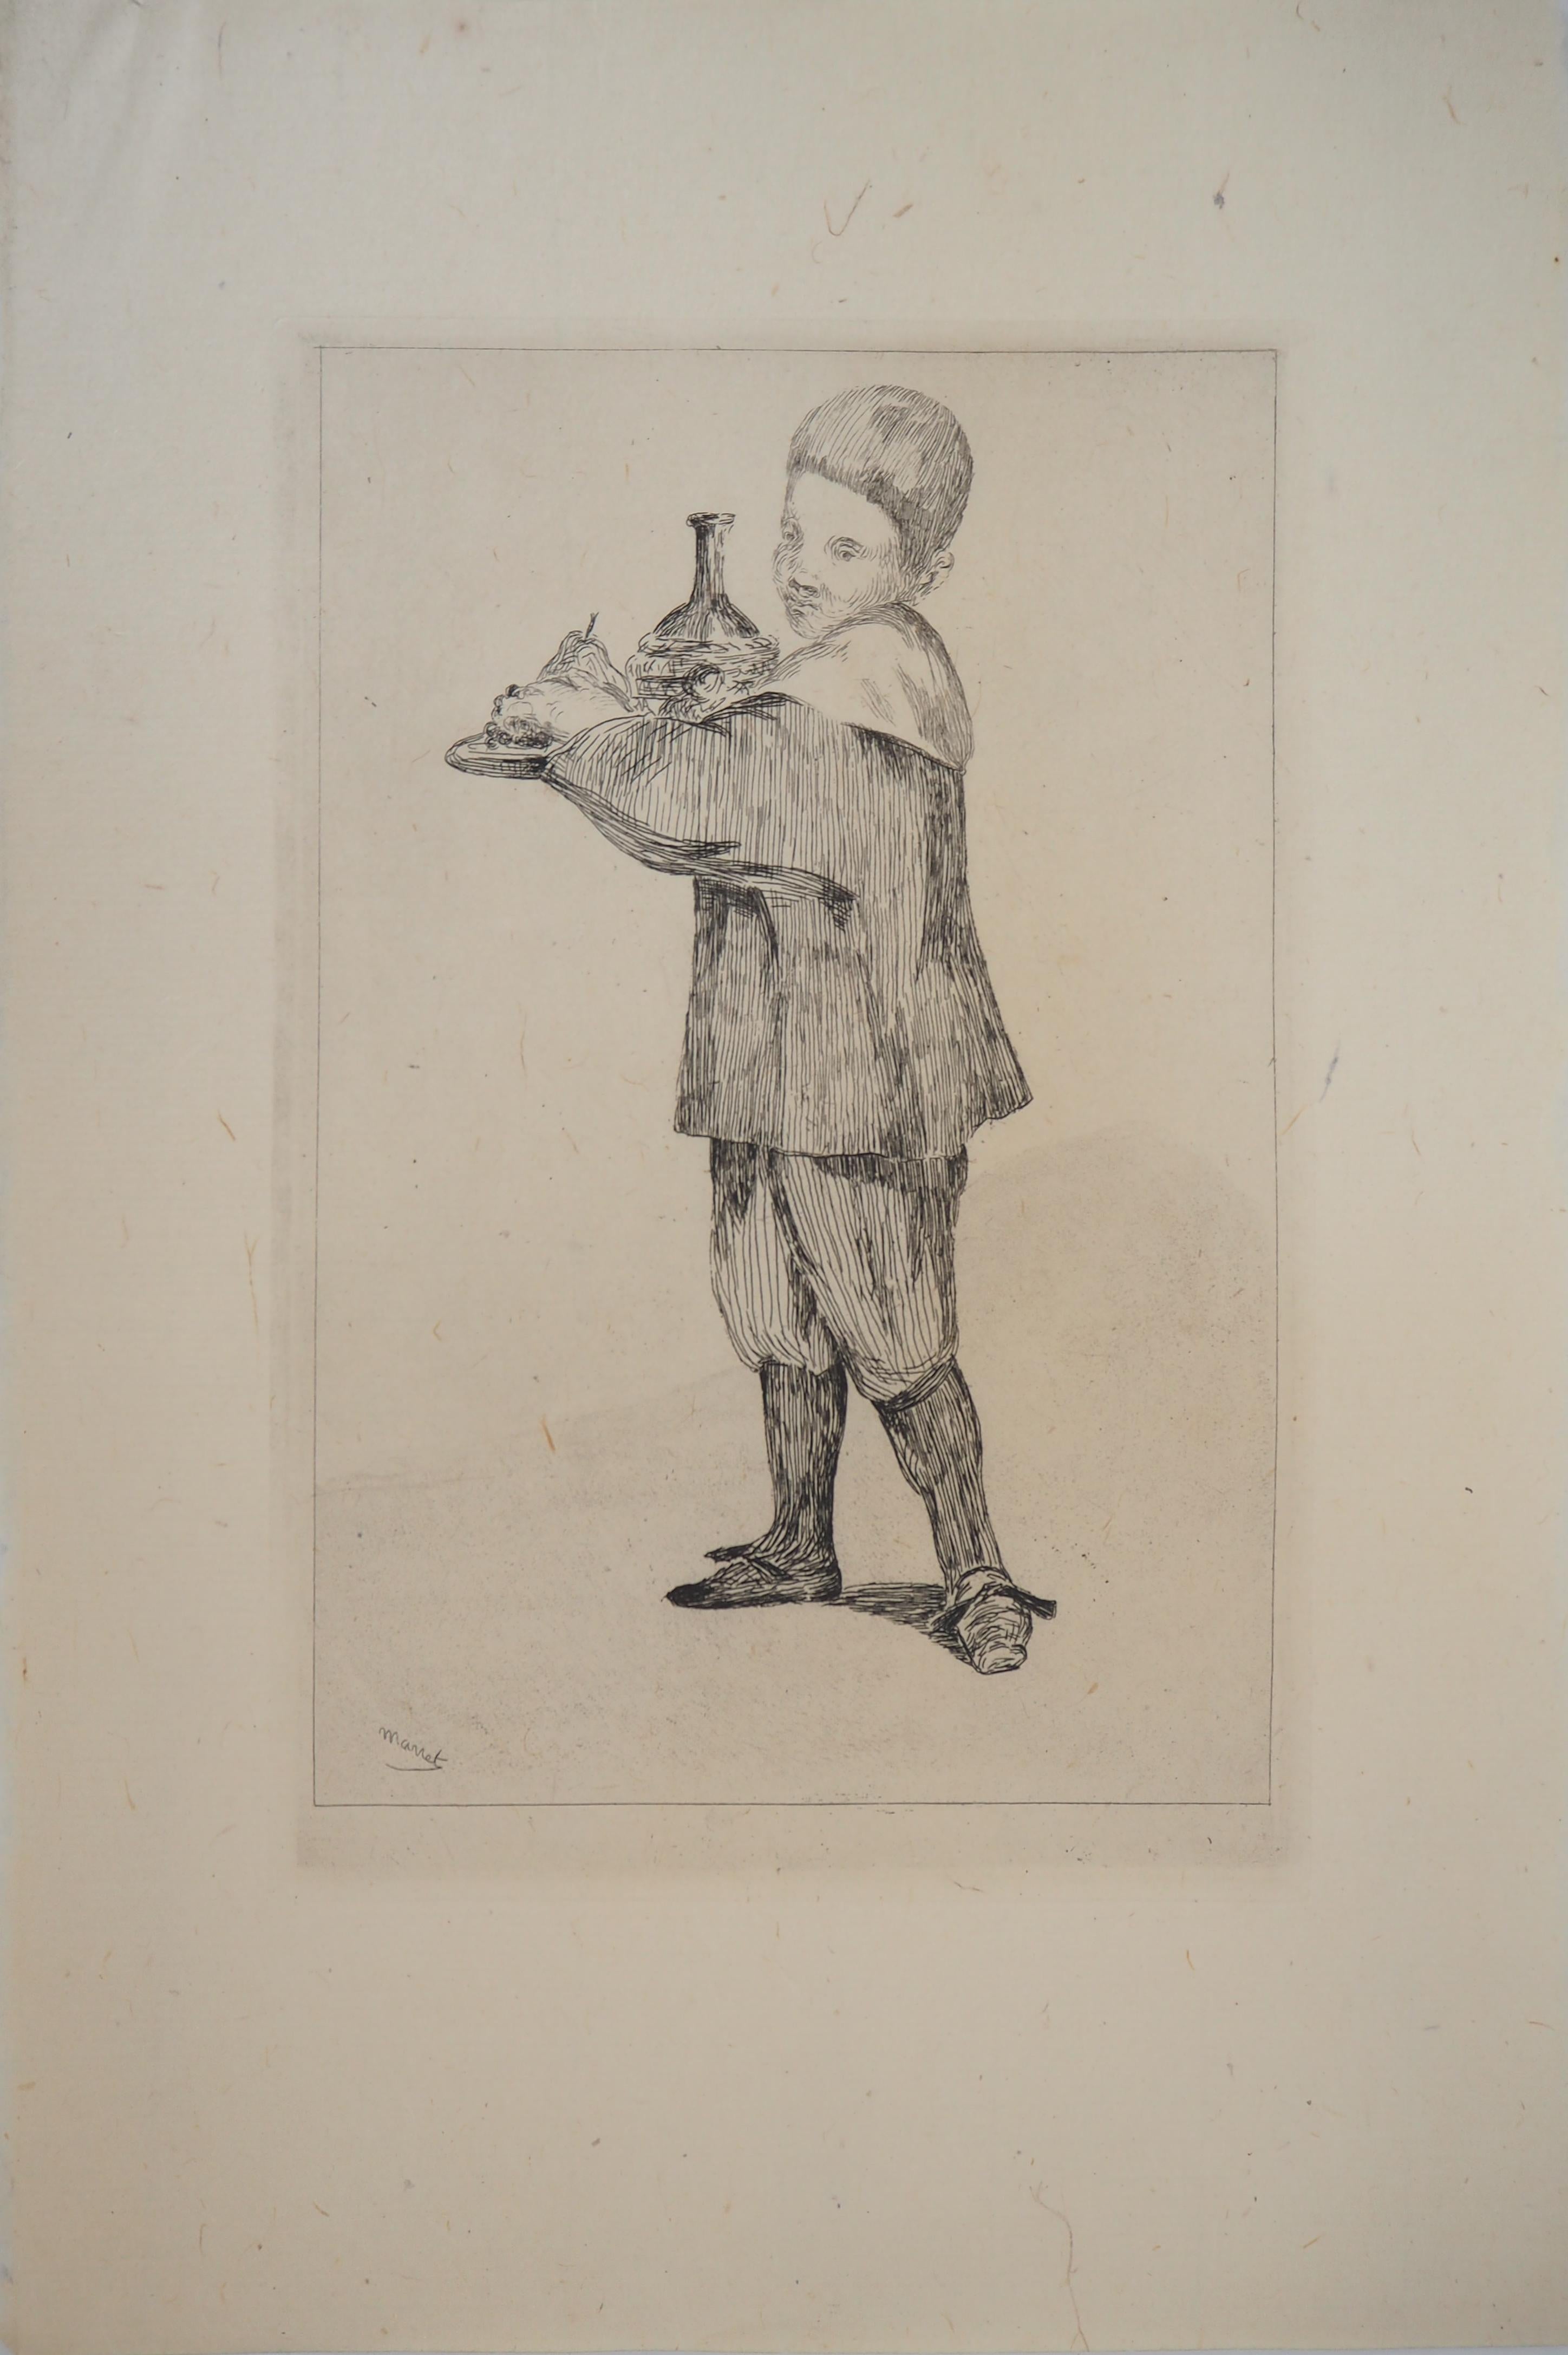 Child with a Tray (Pear and Bottle) - Original Etching (Guerin #15) - Impressionist Print by Edouard Manet